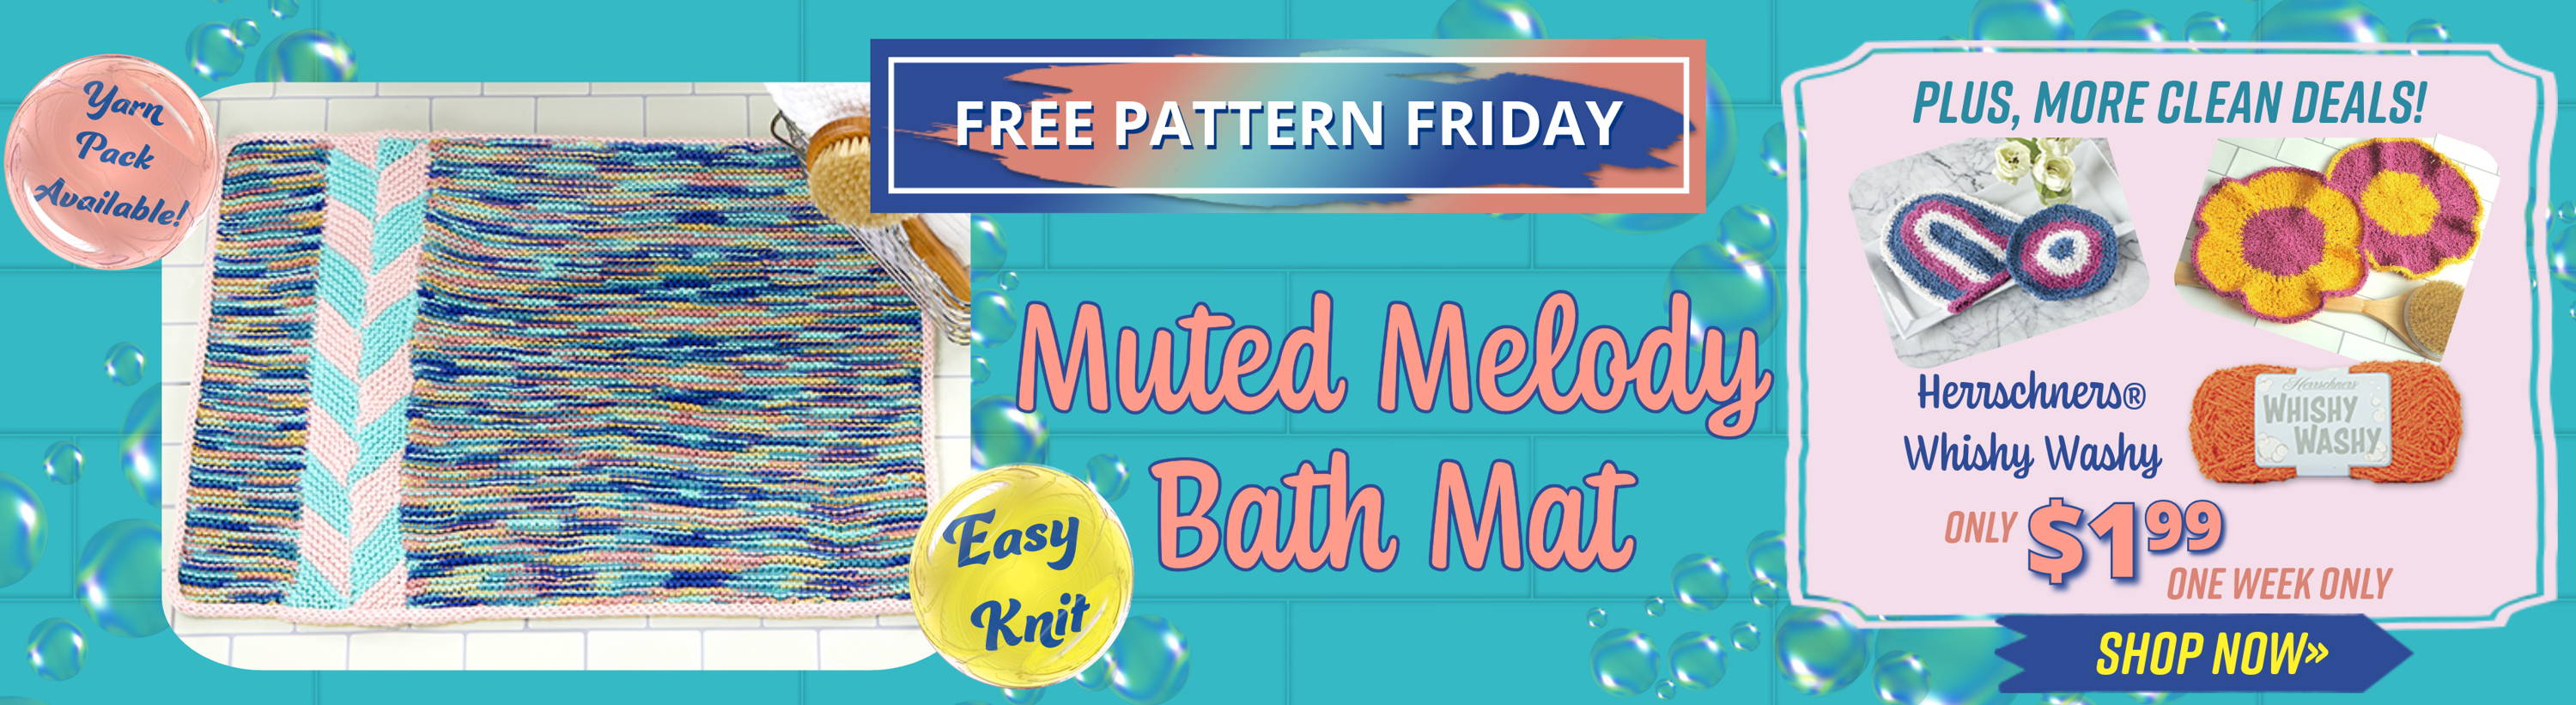 Free Pattern Friday! Muted Melody Bath Mat (Easy Knit). Plus, More Clean Deals. Images: Muted Melody Bath Mat & Herrschners Whishy Washy yarn.